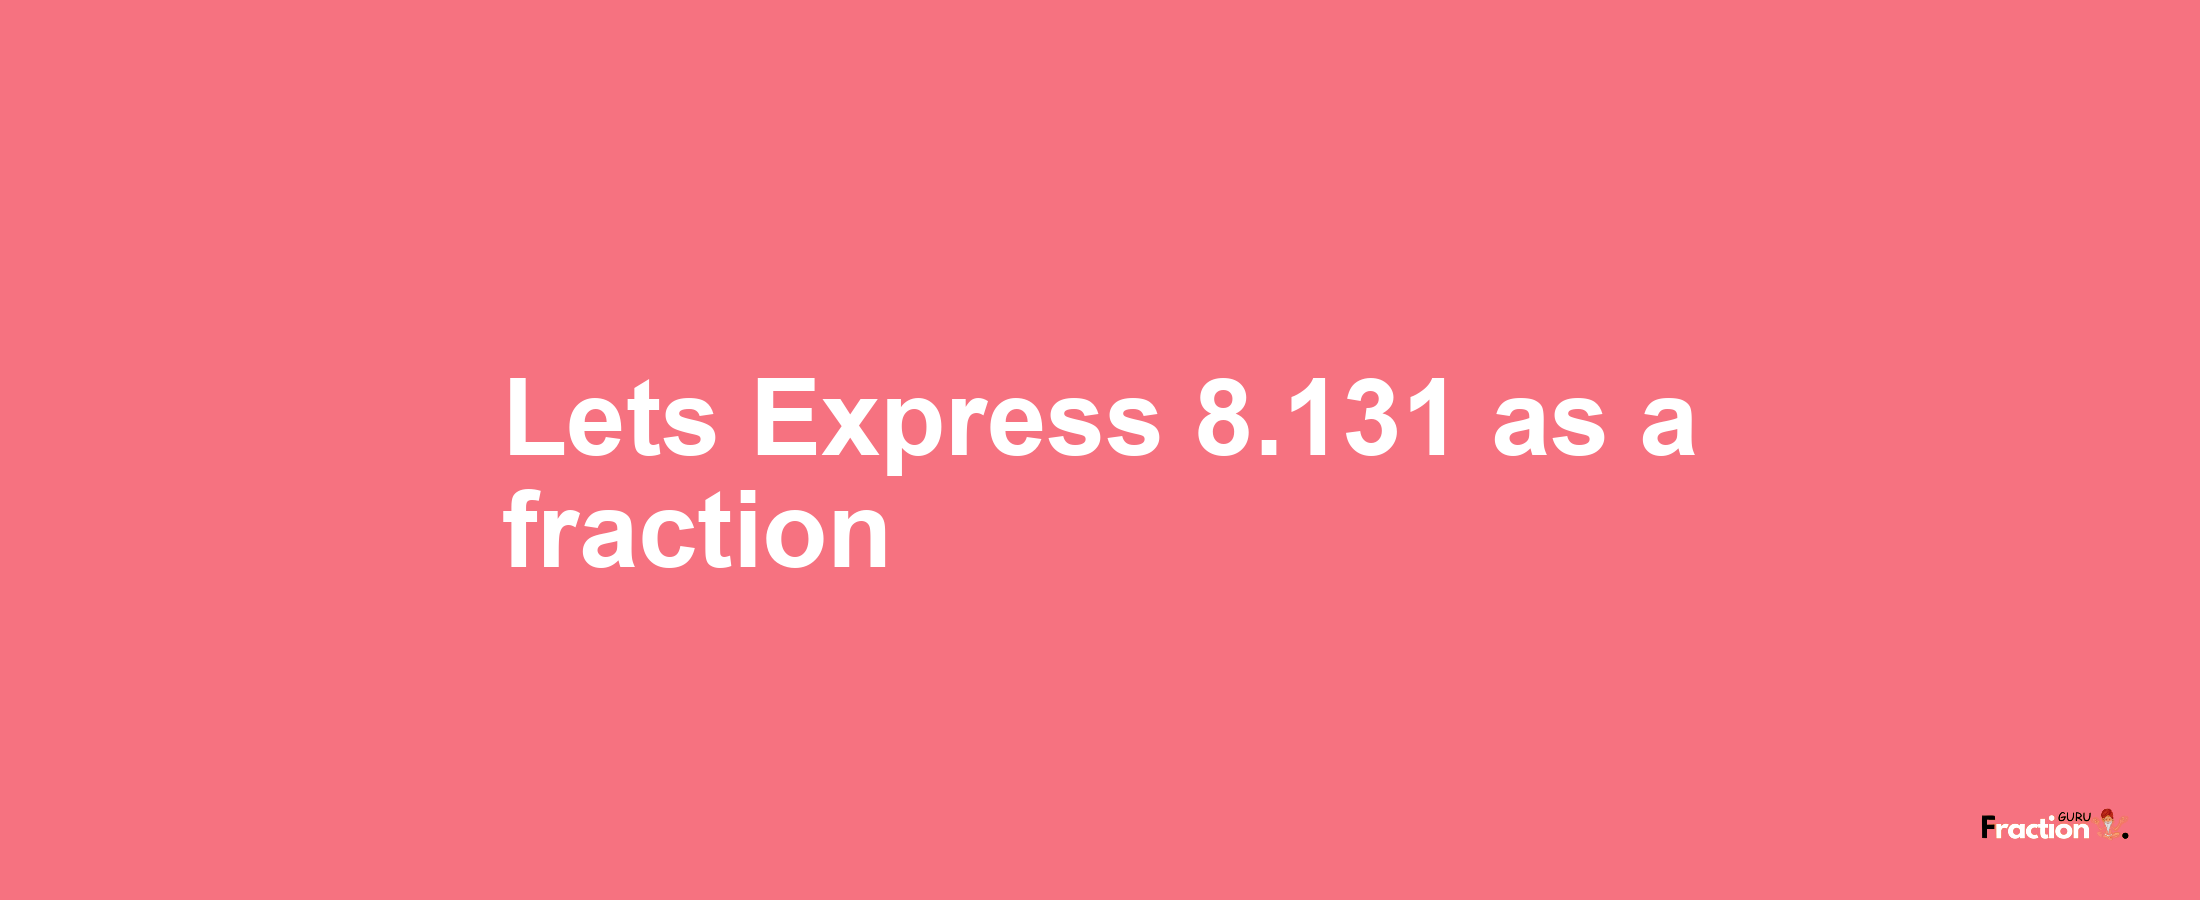 Lets Express 8.131 as afraction